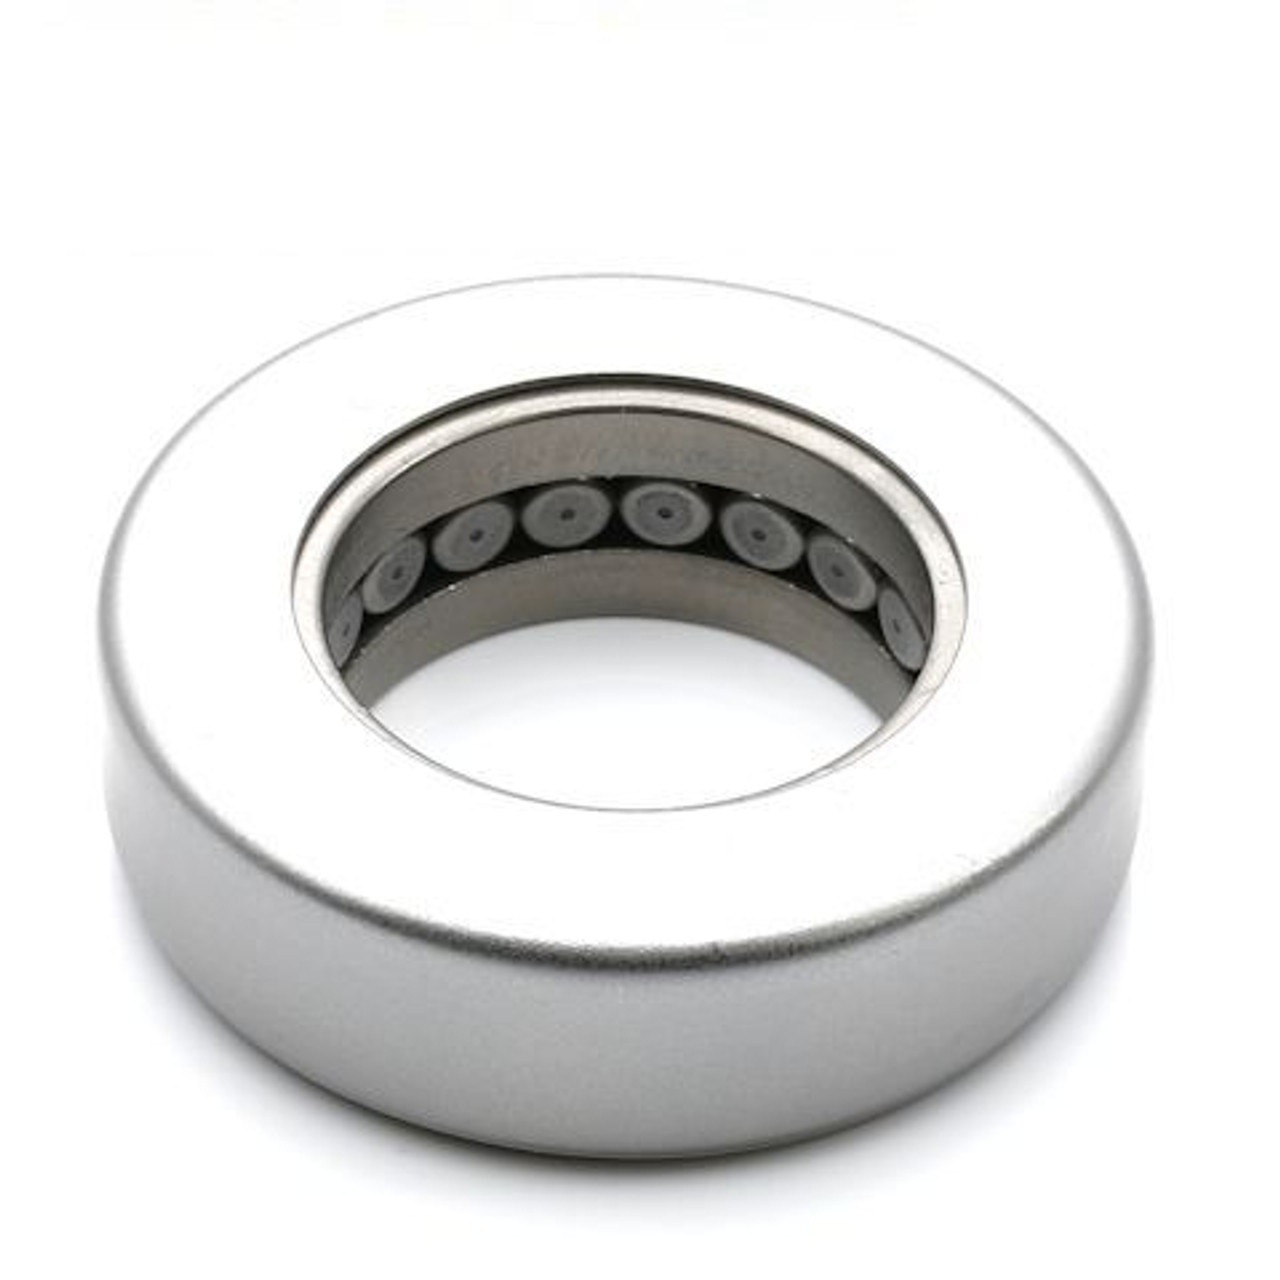 Timken® Stamped Race Thrust Bearing  T151-904A1